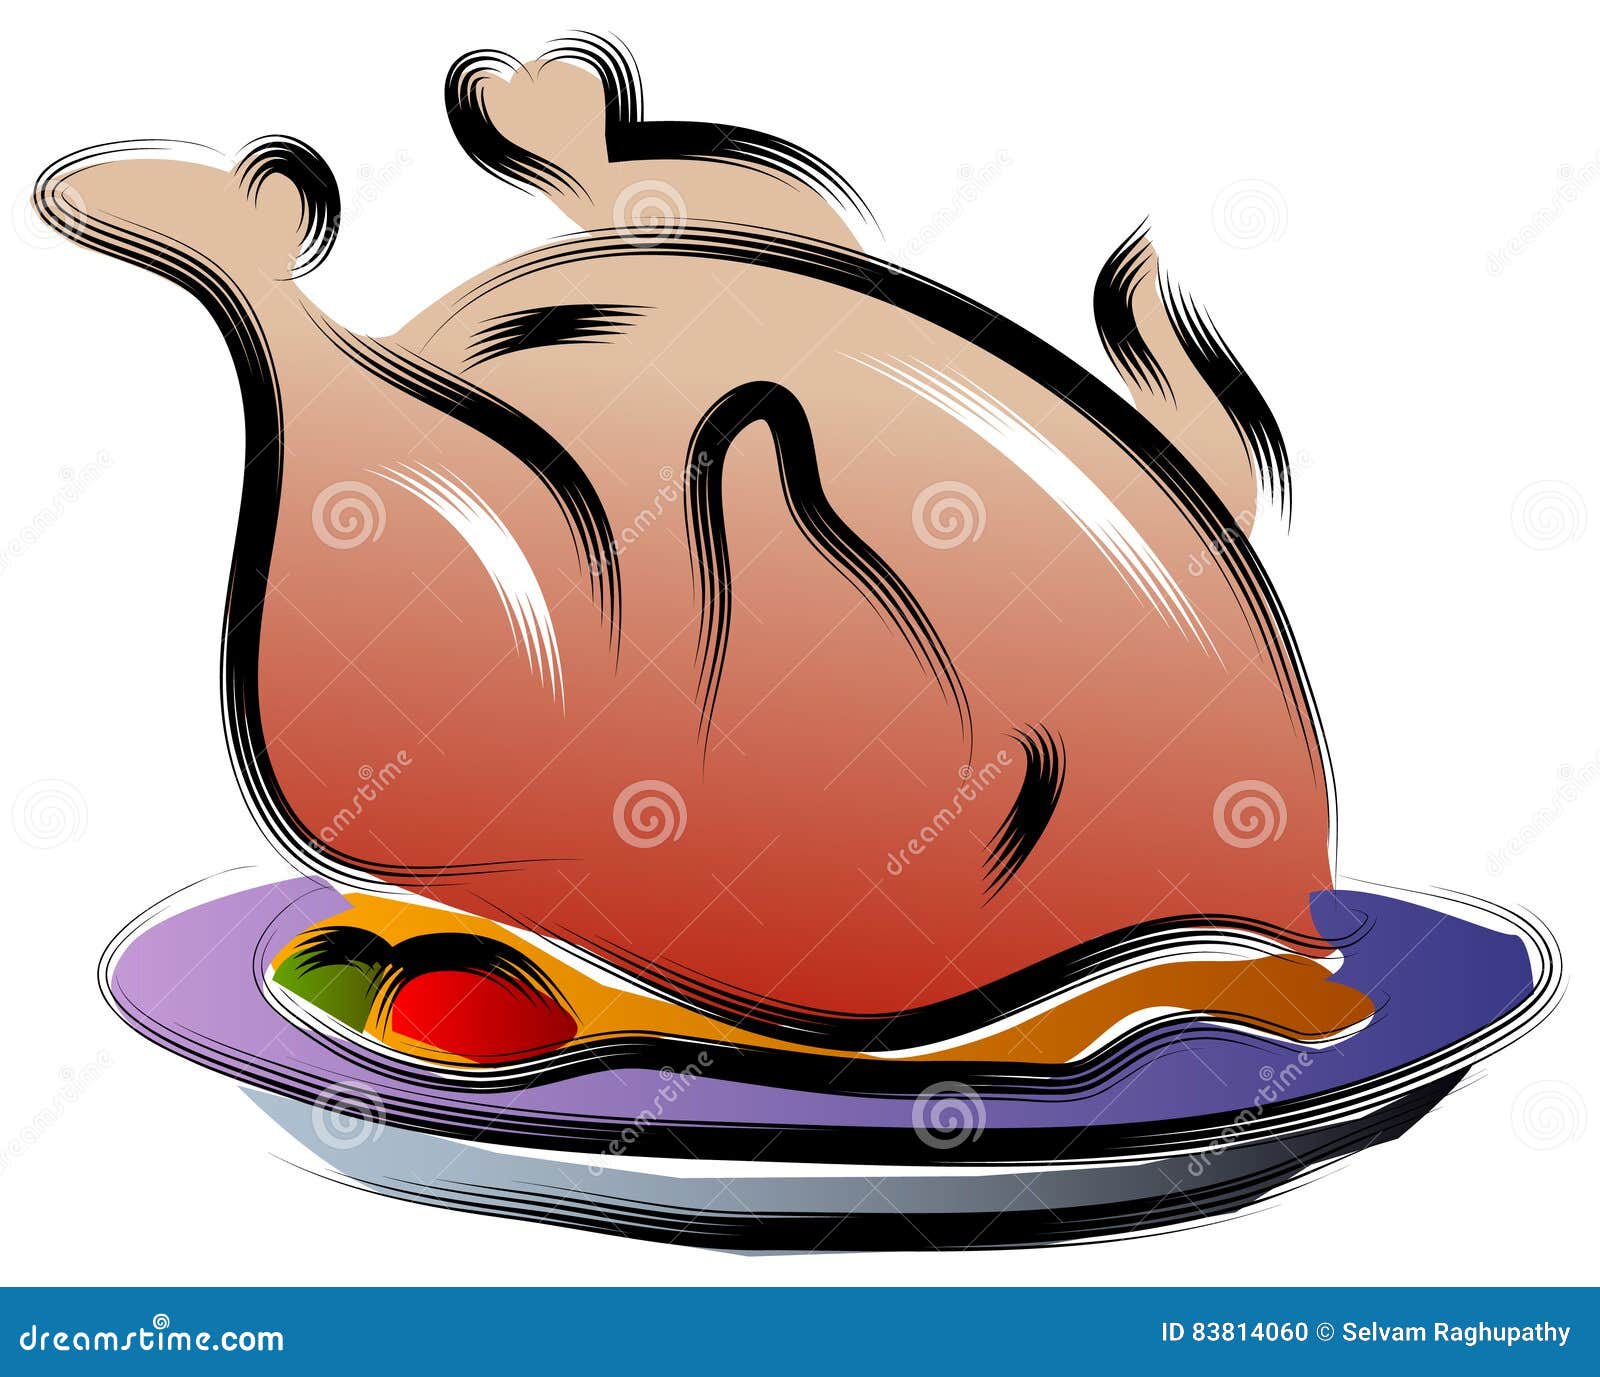 Fried whole chicken stock vector. Illustration of chicken - 83814060